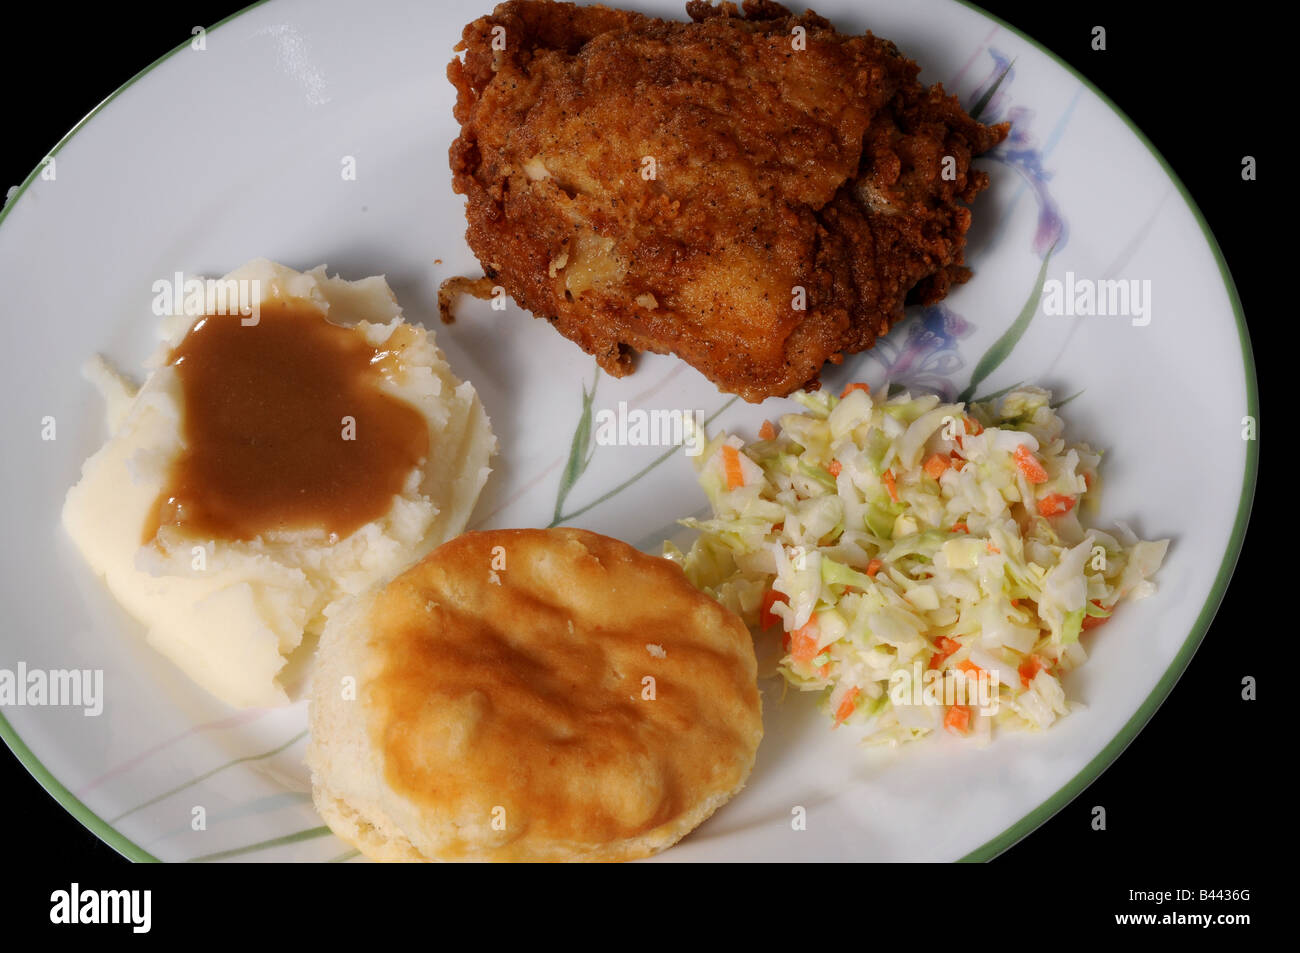 Chicken mashed potatoes cole slaw and a biscuit Stock Photo